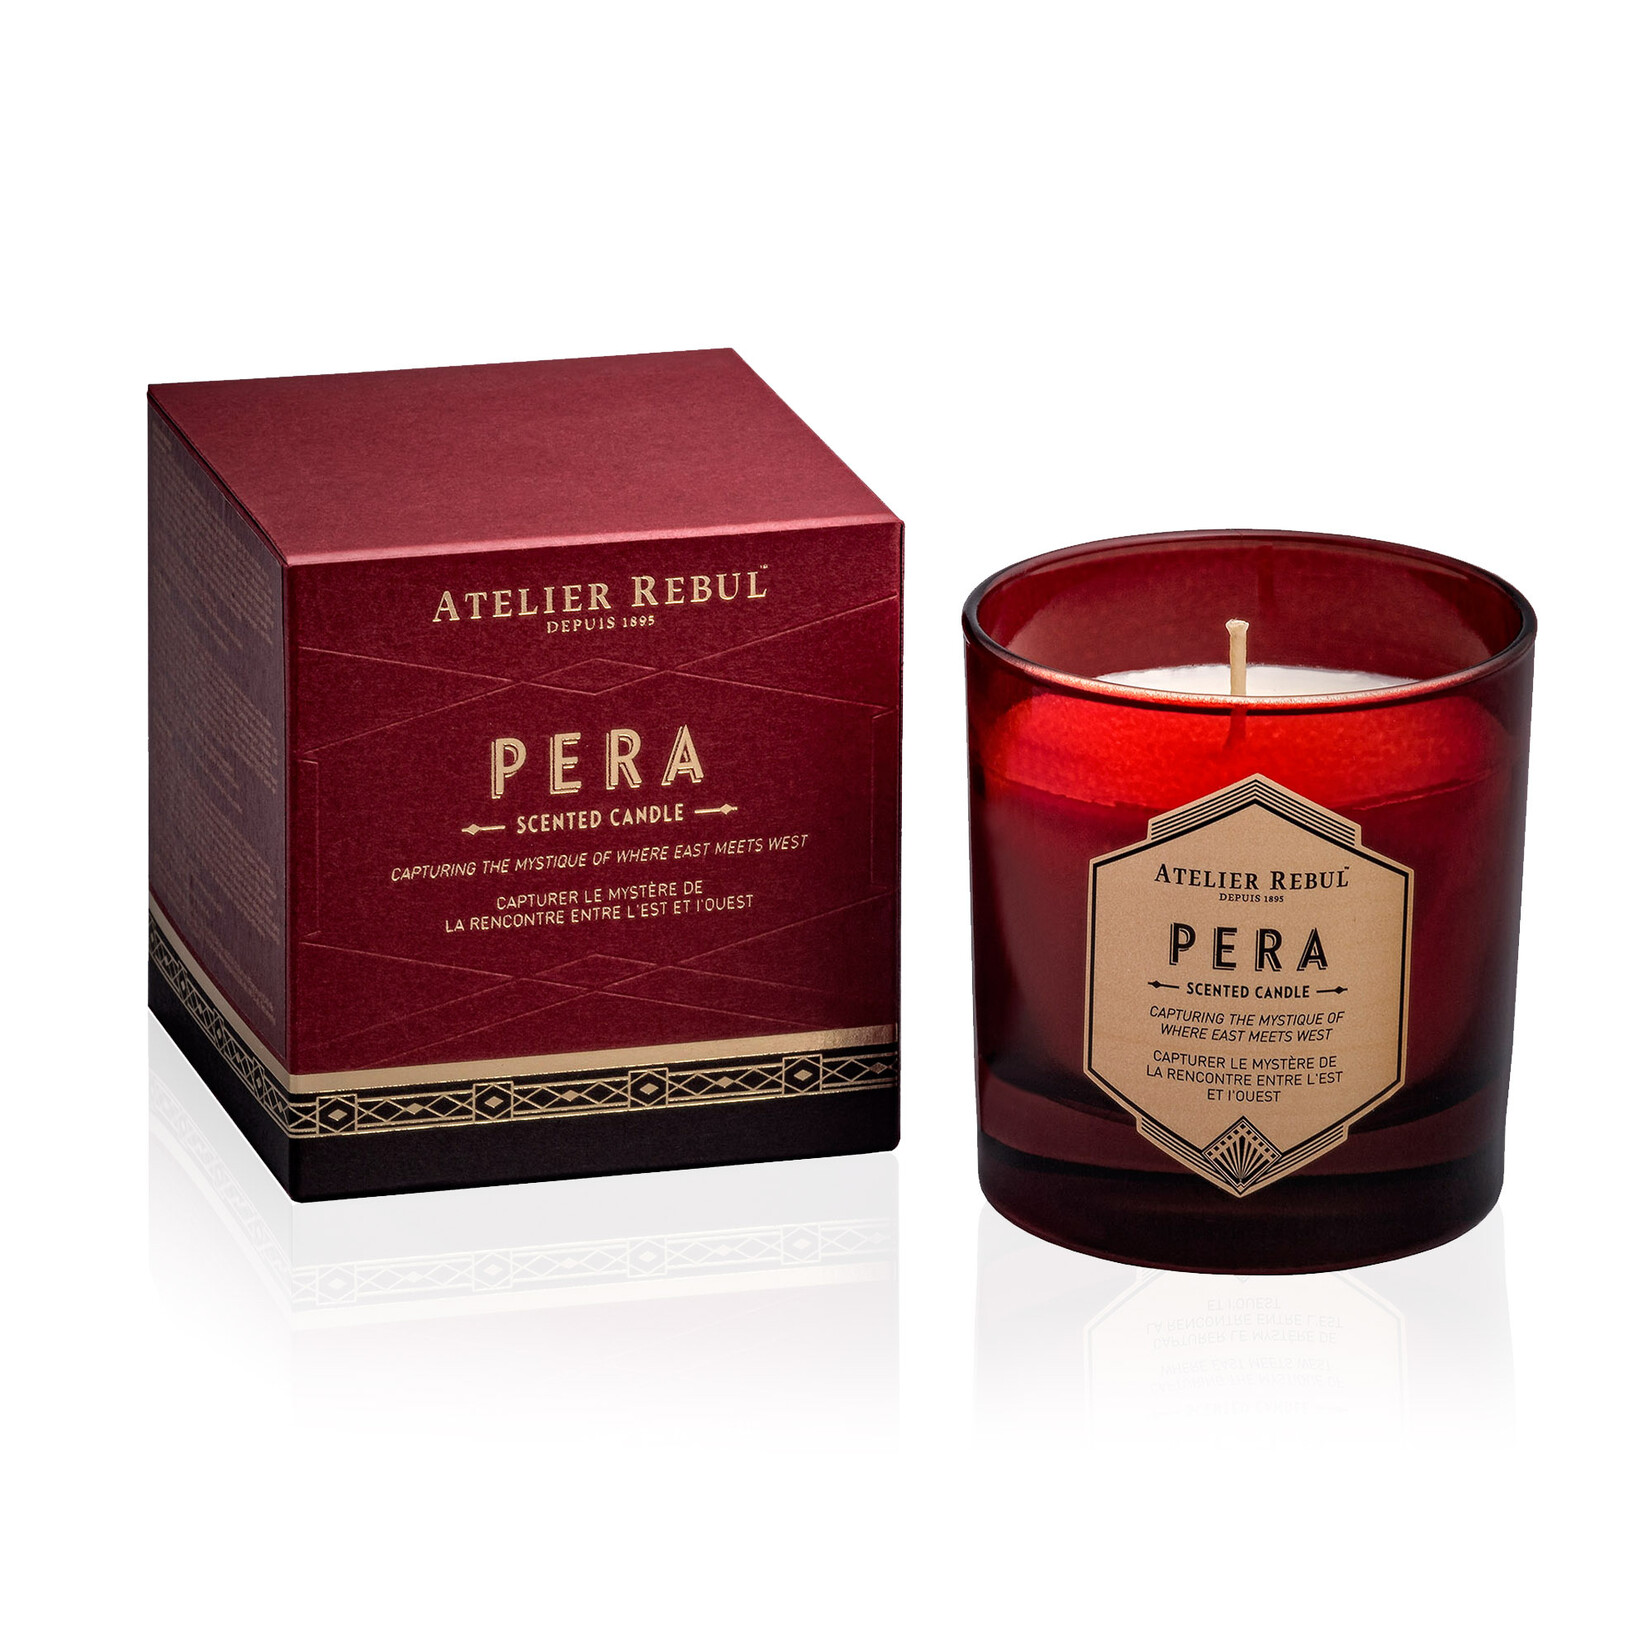 Atelier Rebul Pera Scented Candle - 210g